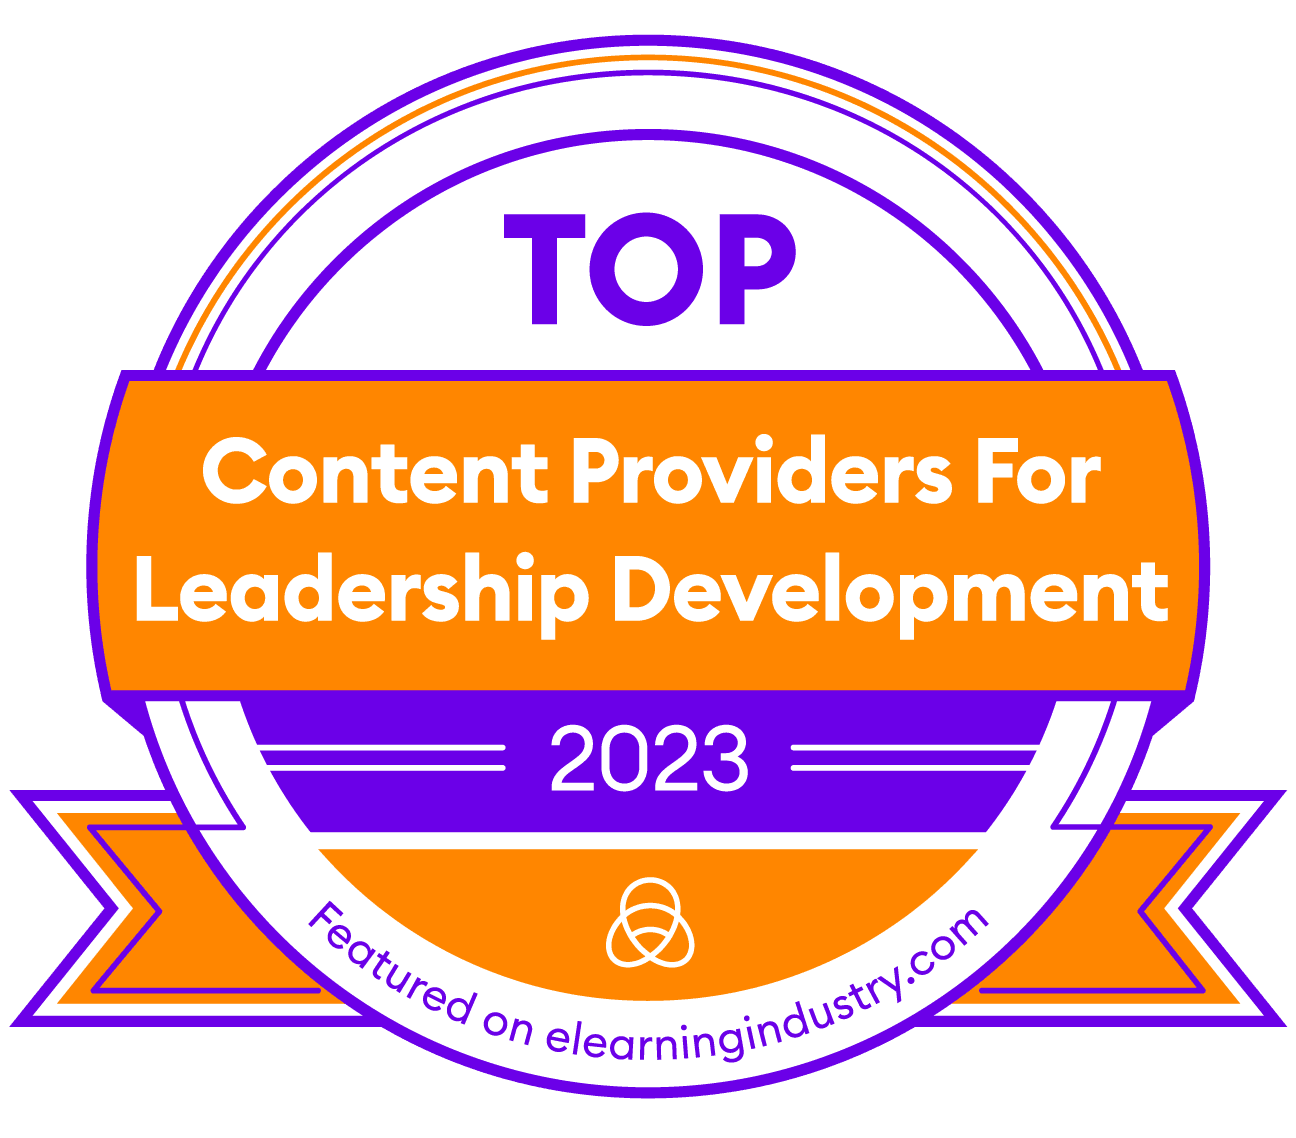 Tesseract Learning is a Top Content Provider for Leadership Development 2023